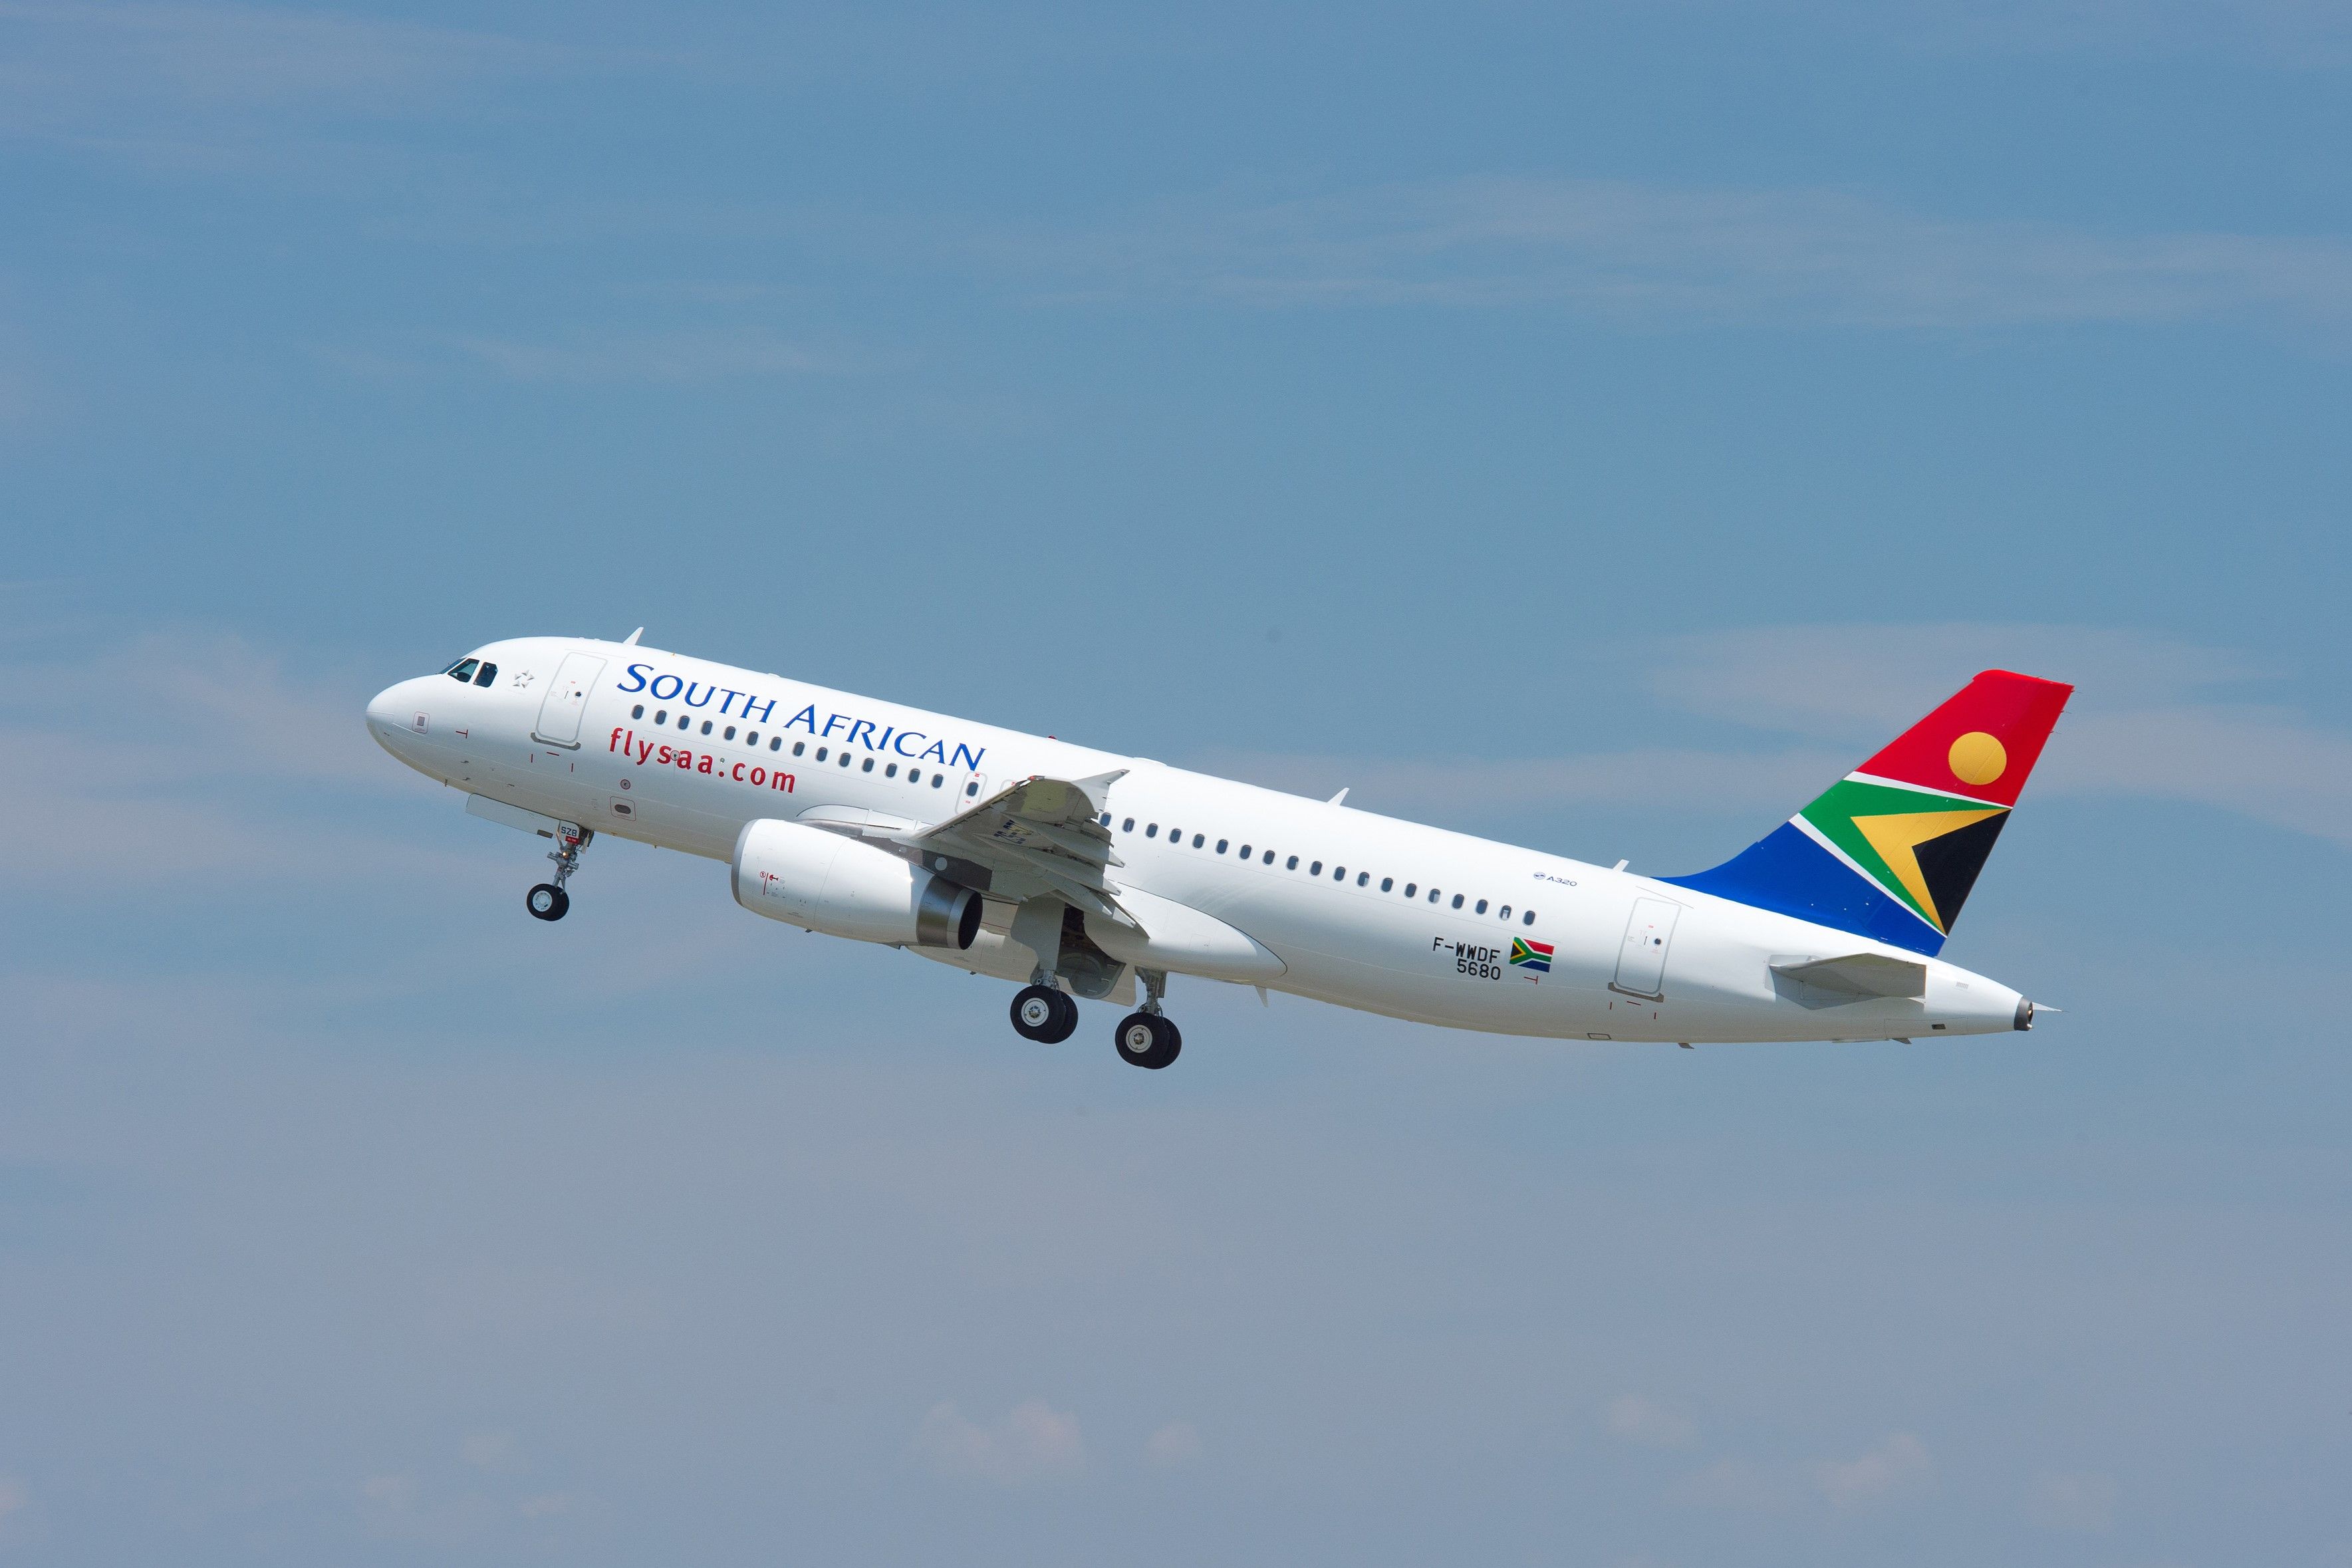 A South African Airways Airbus A320 Flying in the sky.